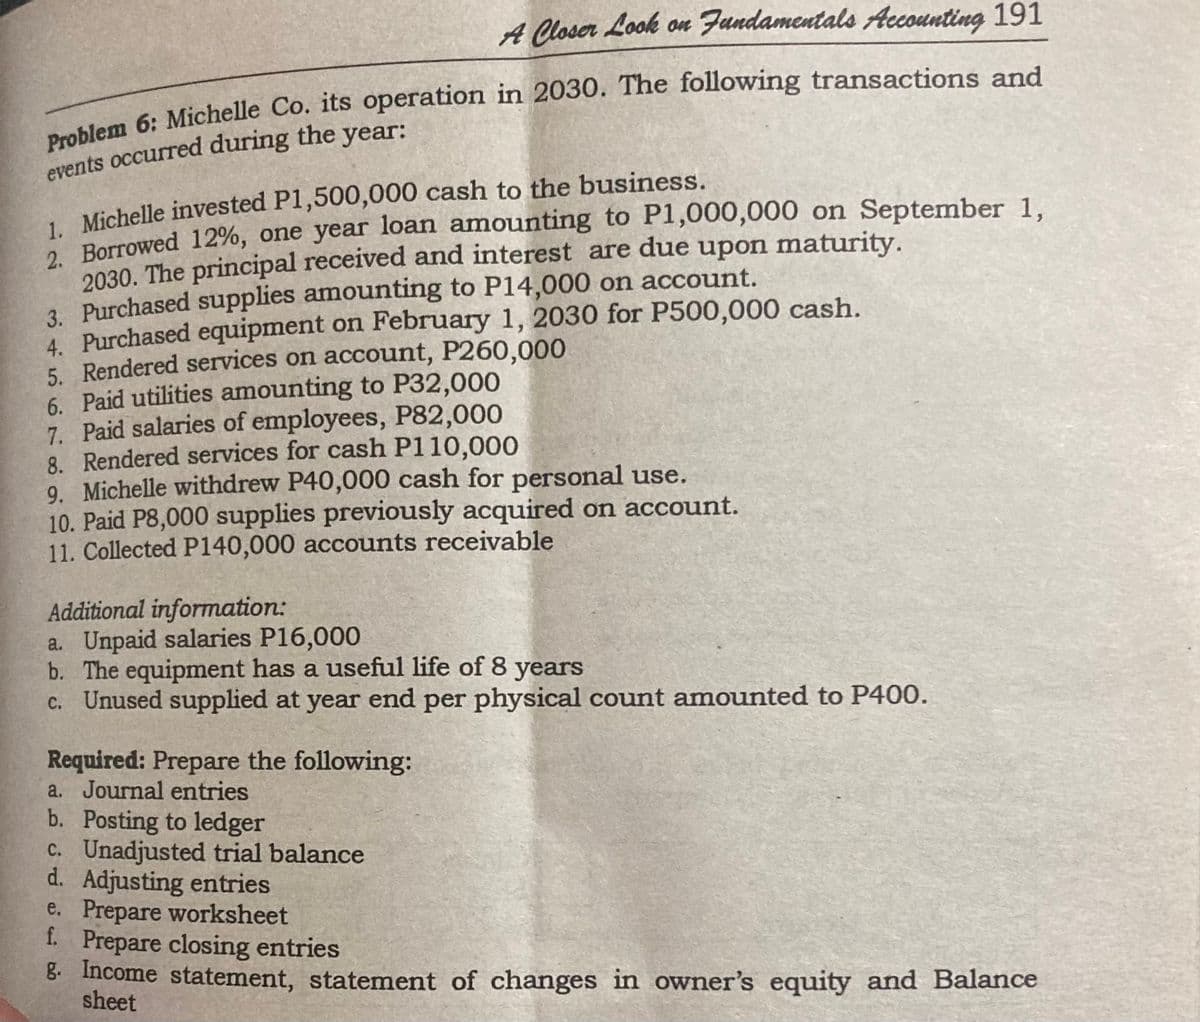 A Closer Look on Fundamentals Accounting 191
Problem 6: Michelle Co. its operation in 2030. The following transactions and
events occurred during the year:
1. Michelle invested P1,500,000 cash to the business.
2. Borrowed 12%, one year loan amounting to P1,000,000 on September 1,
2030. The principal received and interest are due upon maturity.
3. Purchased supplies amounting to P14,000 on account.
4. Purchased equipment on February 1, 2030 for P500,000 cash.
5. Rendered services on account, P260,000
6. Paid utilities amounting to P32,000
7. Paid salaries of employees, P82,000
8. Rendered services for cash P110,000
9. Michelle withdrew P40,000 cash for personal use.
10. Paid P8,000 supplies previously acquired on account.
11. Collected P140,000 accounts receivable
Additional information:
a. Unpaid salaries P16,000
b. The equipment has a useful life of 8 years
c. Unused supplied at year end per physical count amounted to P400.
Required: Prepare the following:
a. Journal entries
b. Posting to ledger
c. Unadjusted trial balance
d. Adjusting entries
e. Prepare worksheet
f. Prepare closing entries
g. Income statement, statement of changes in owner's equity and Balance
sheet